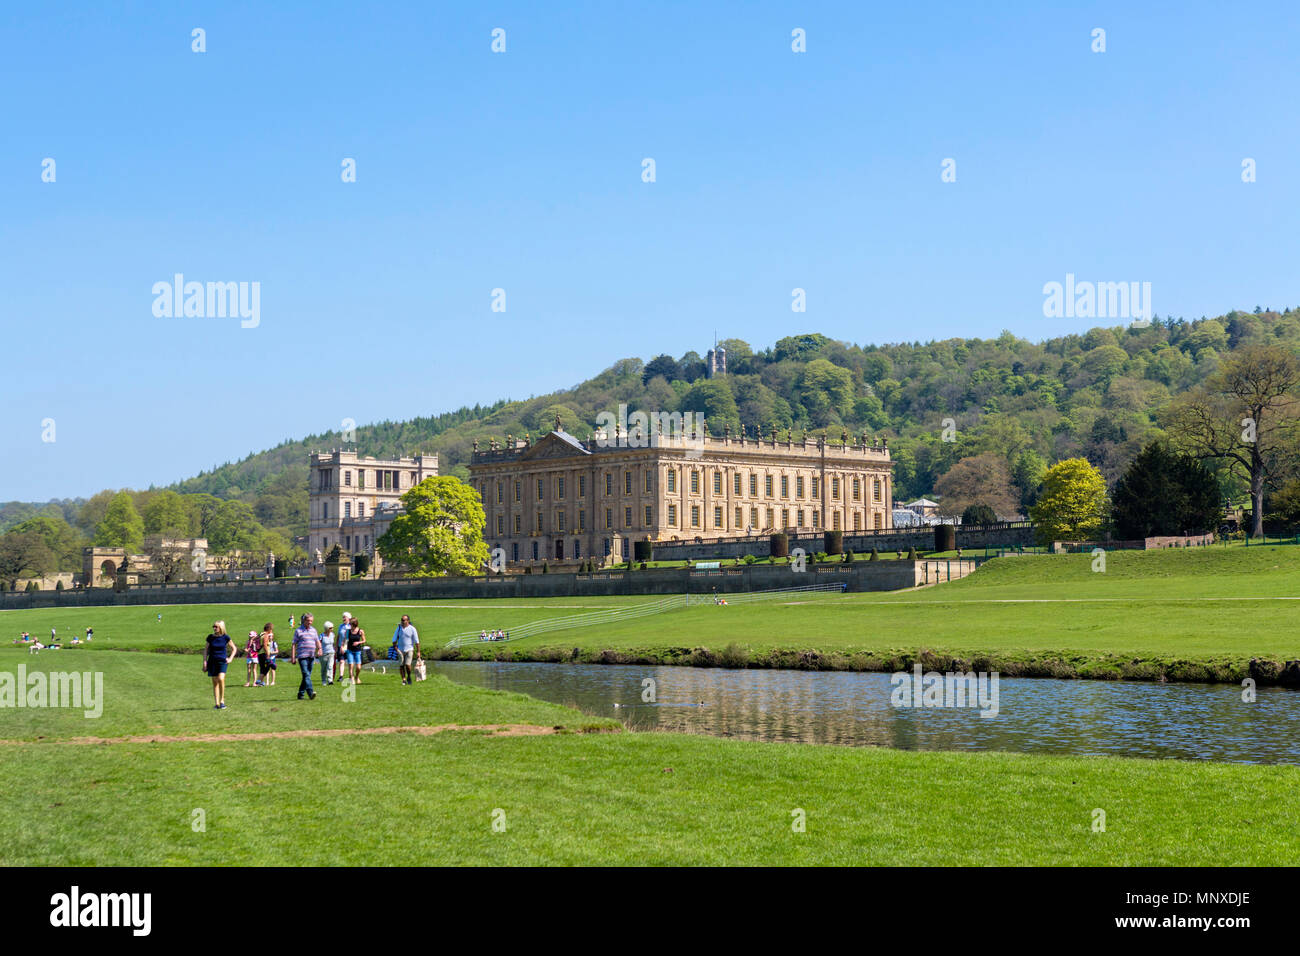 Visitors walking alongside the River Derwent in Chatsworth Park with Chatsworth House behind, Chatsworth, Derbyshire, England, UK Stock Photo